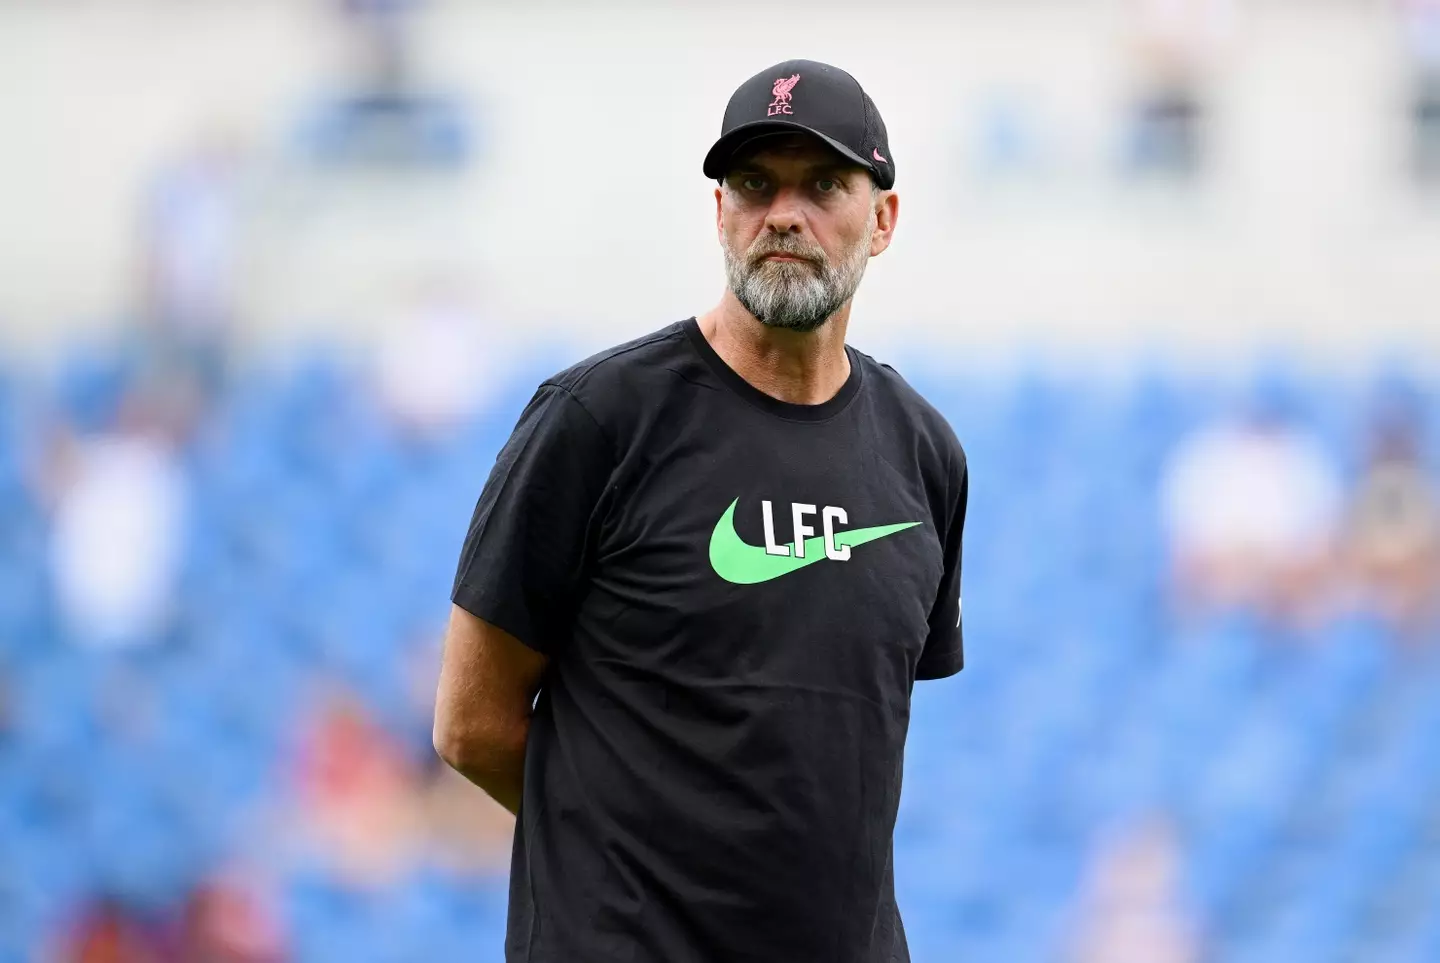 Jurgen Klopp will be hoping Liverpool can improve on their disappointing 2022/23 campaign. (Image: Getty)